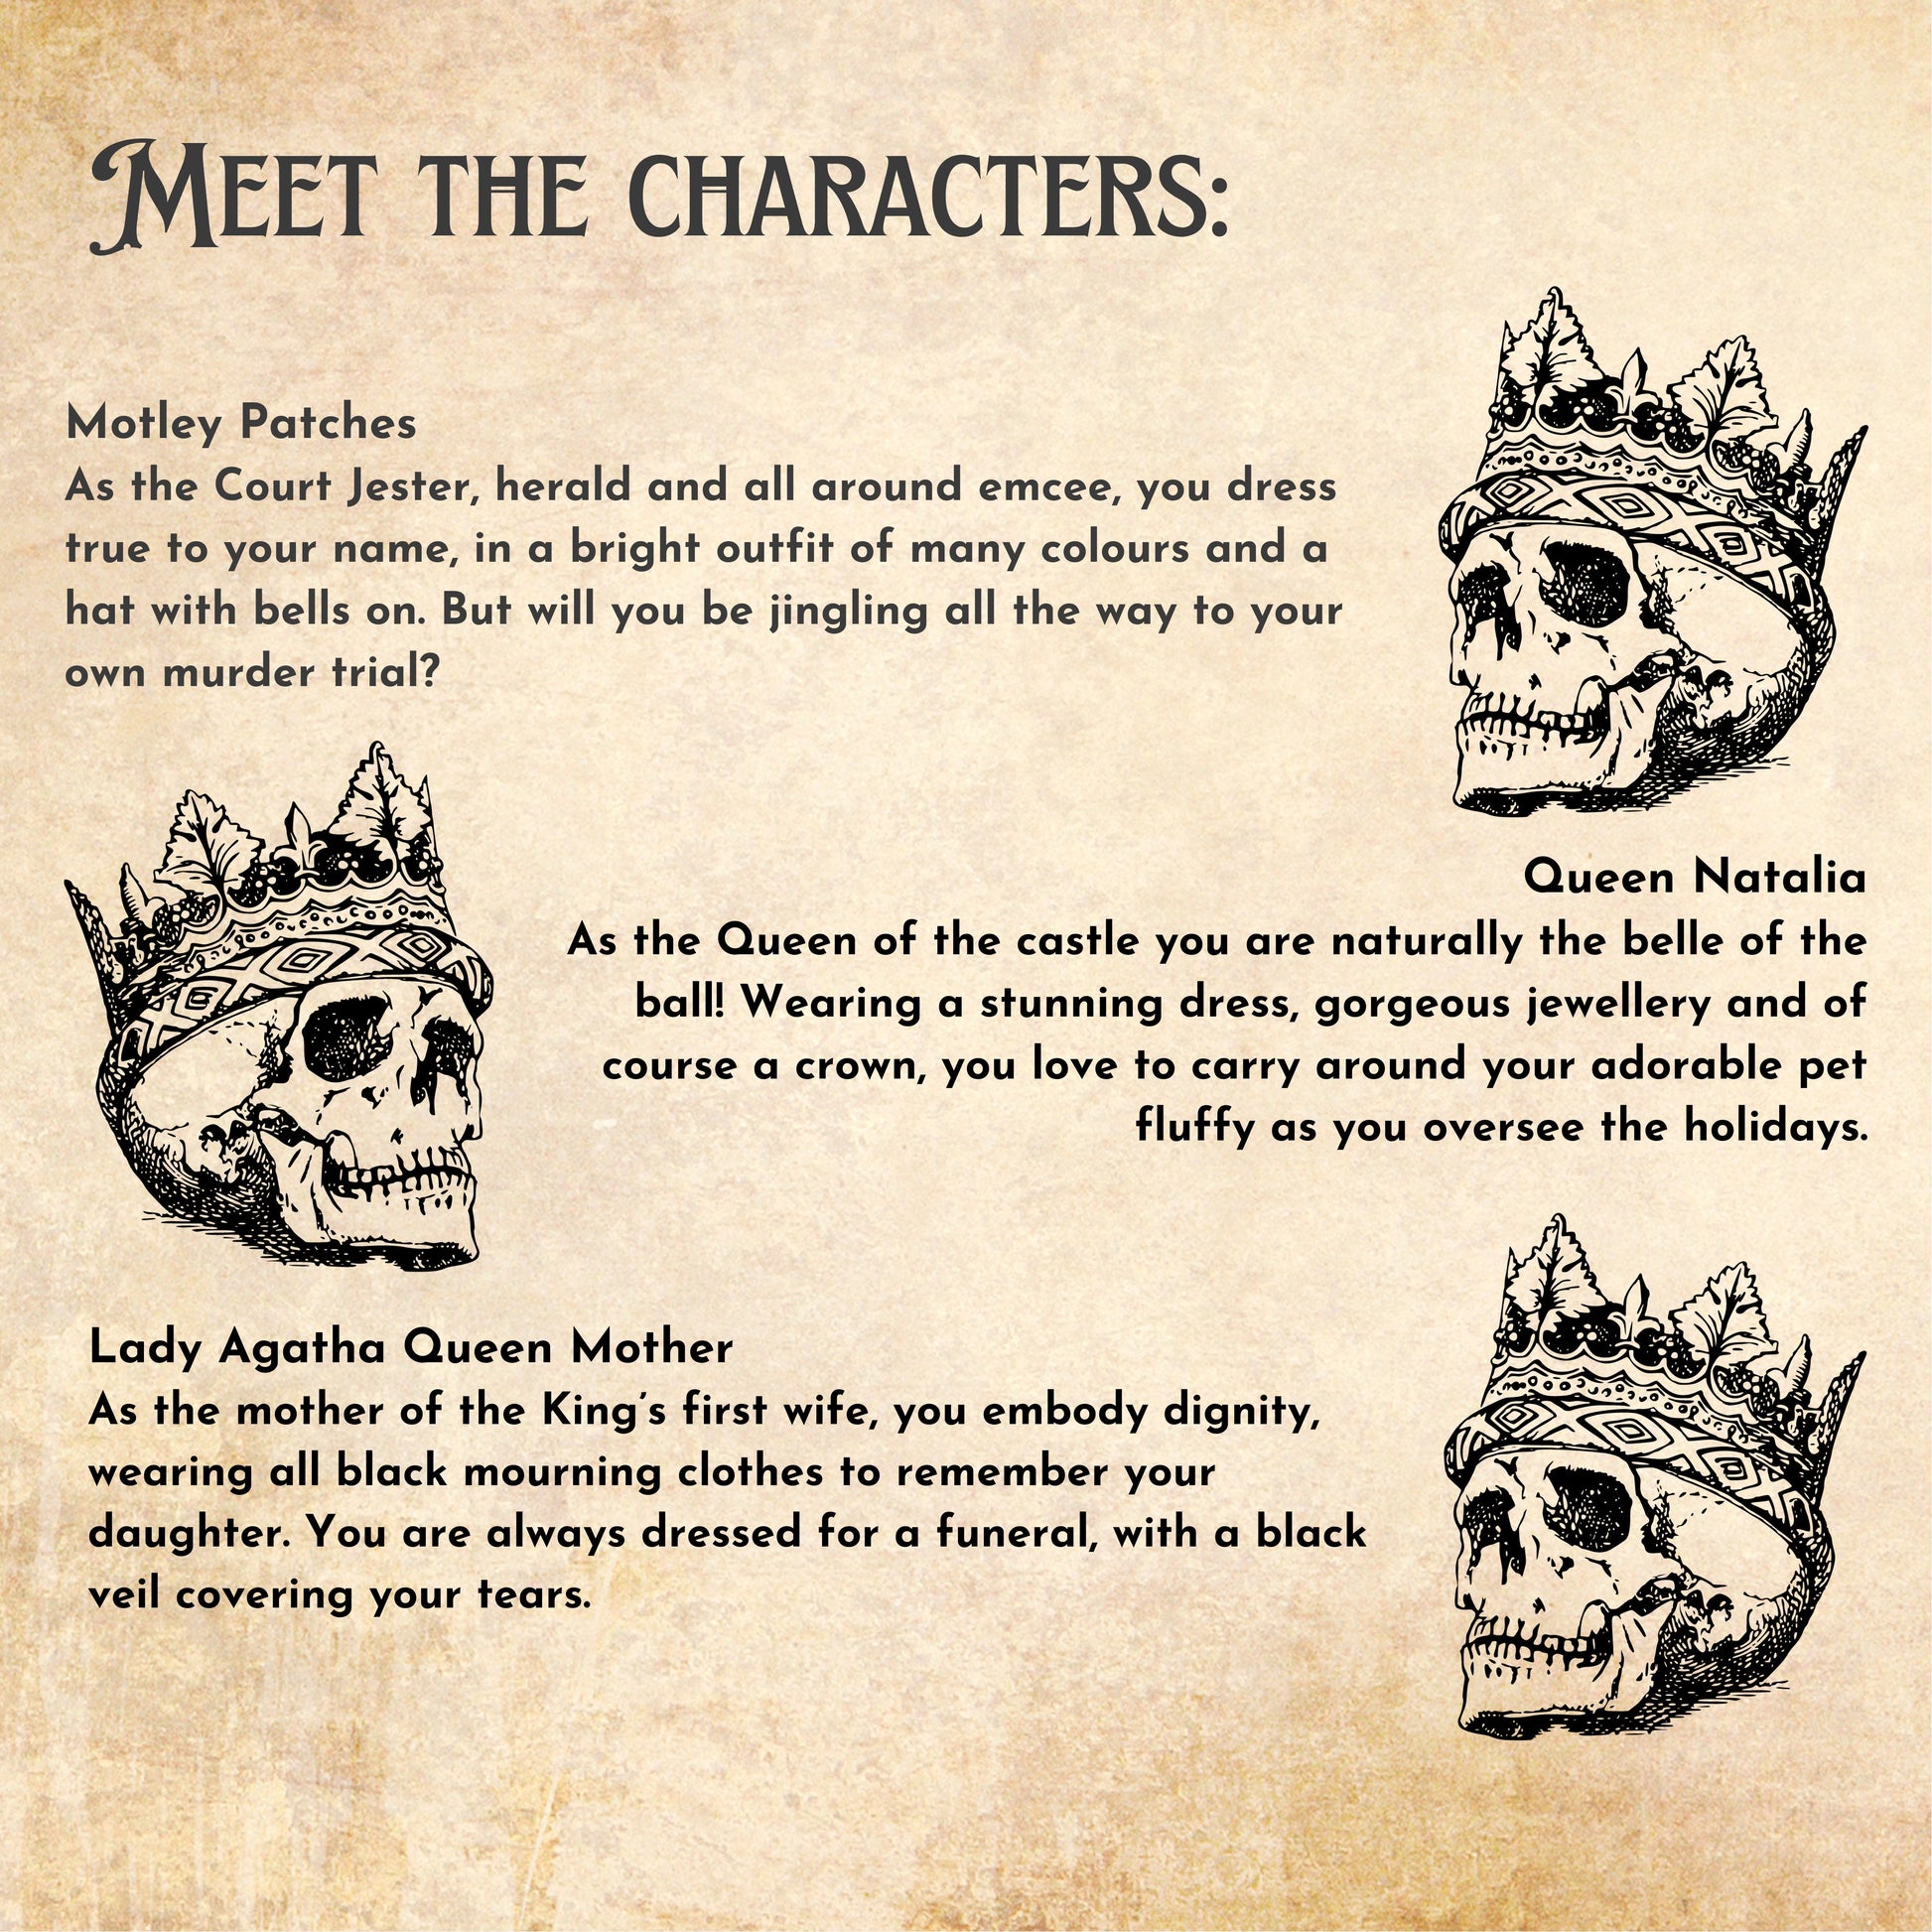 Meet the characters – a description of characters in the game